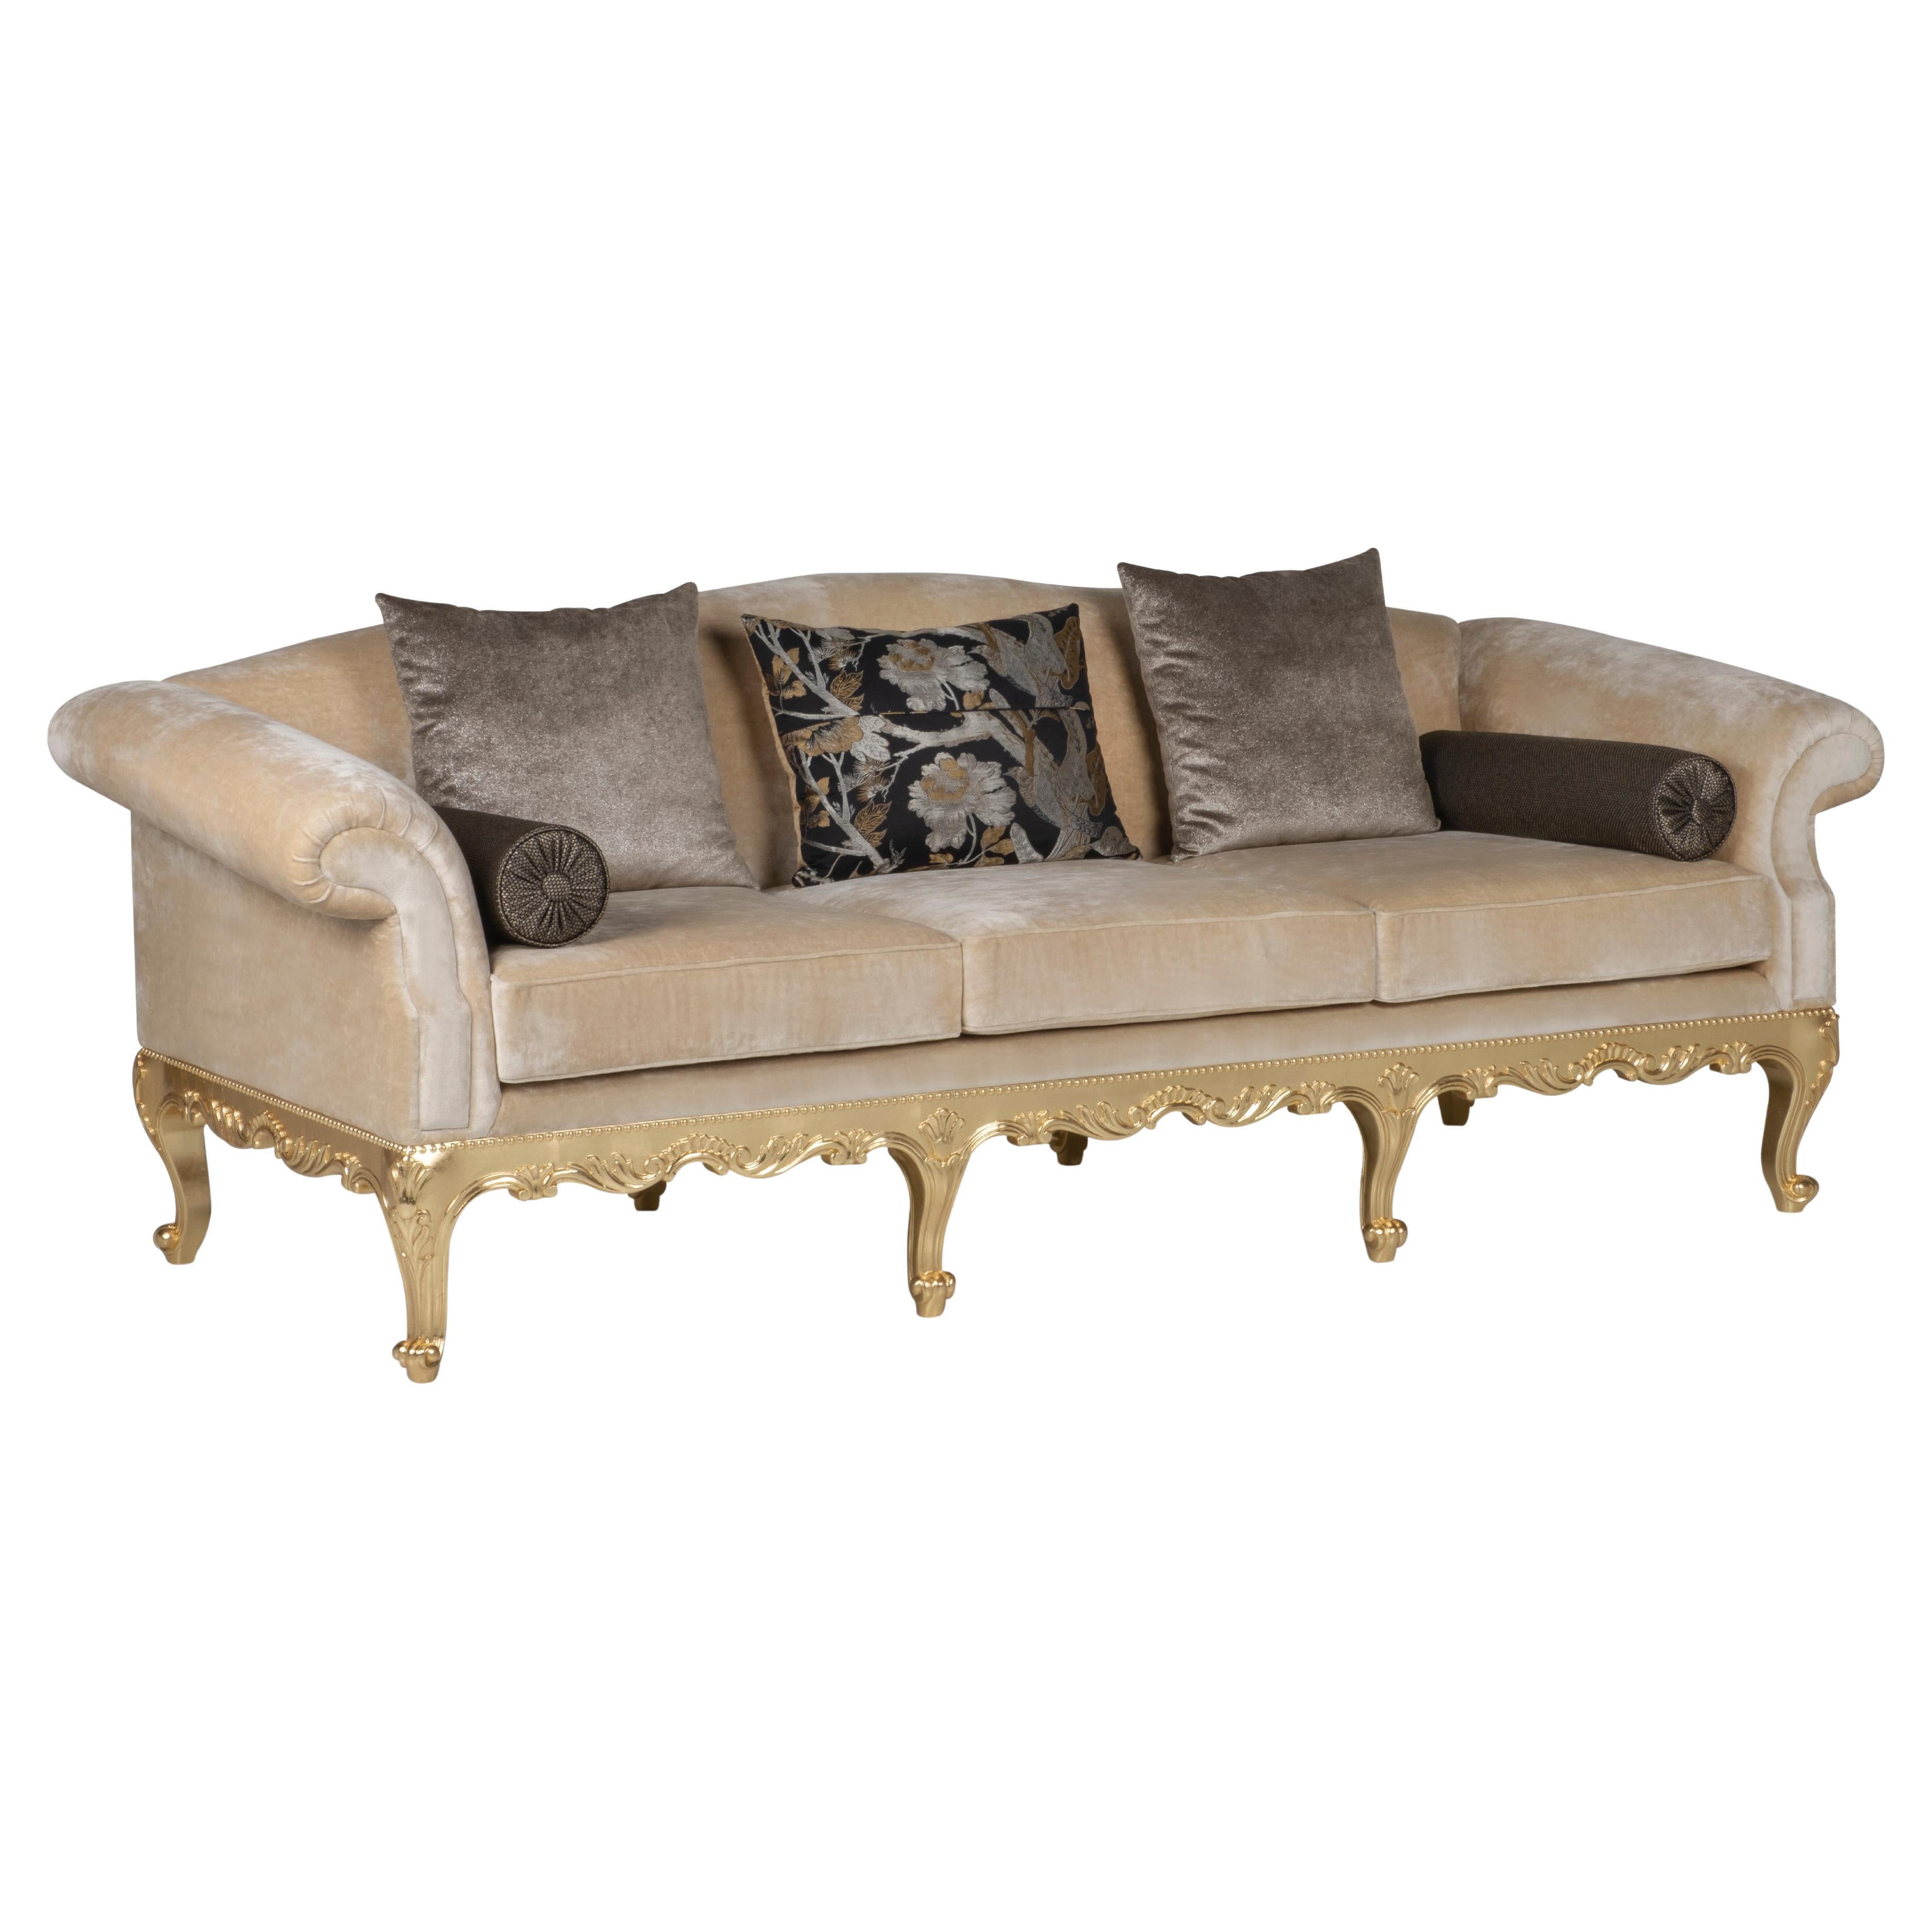 French Neoclassical Sofa Dormeuse Jacquard Champagne Handmade Portugal For Sale